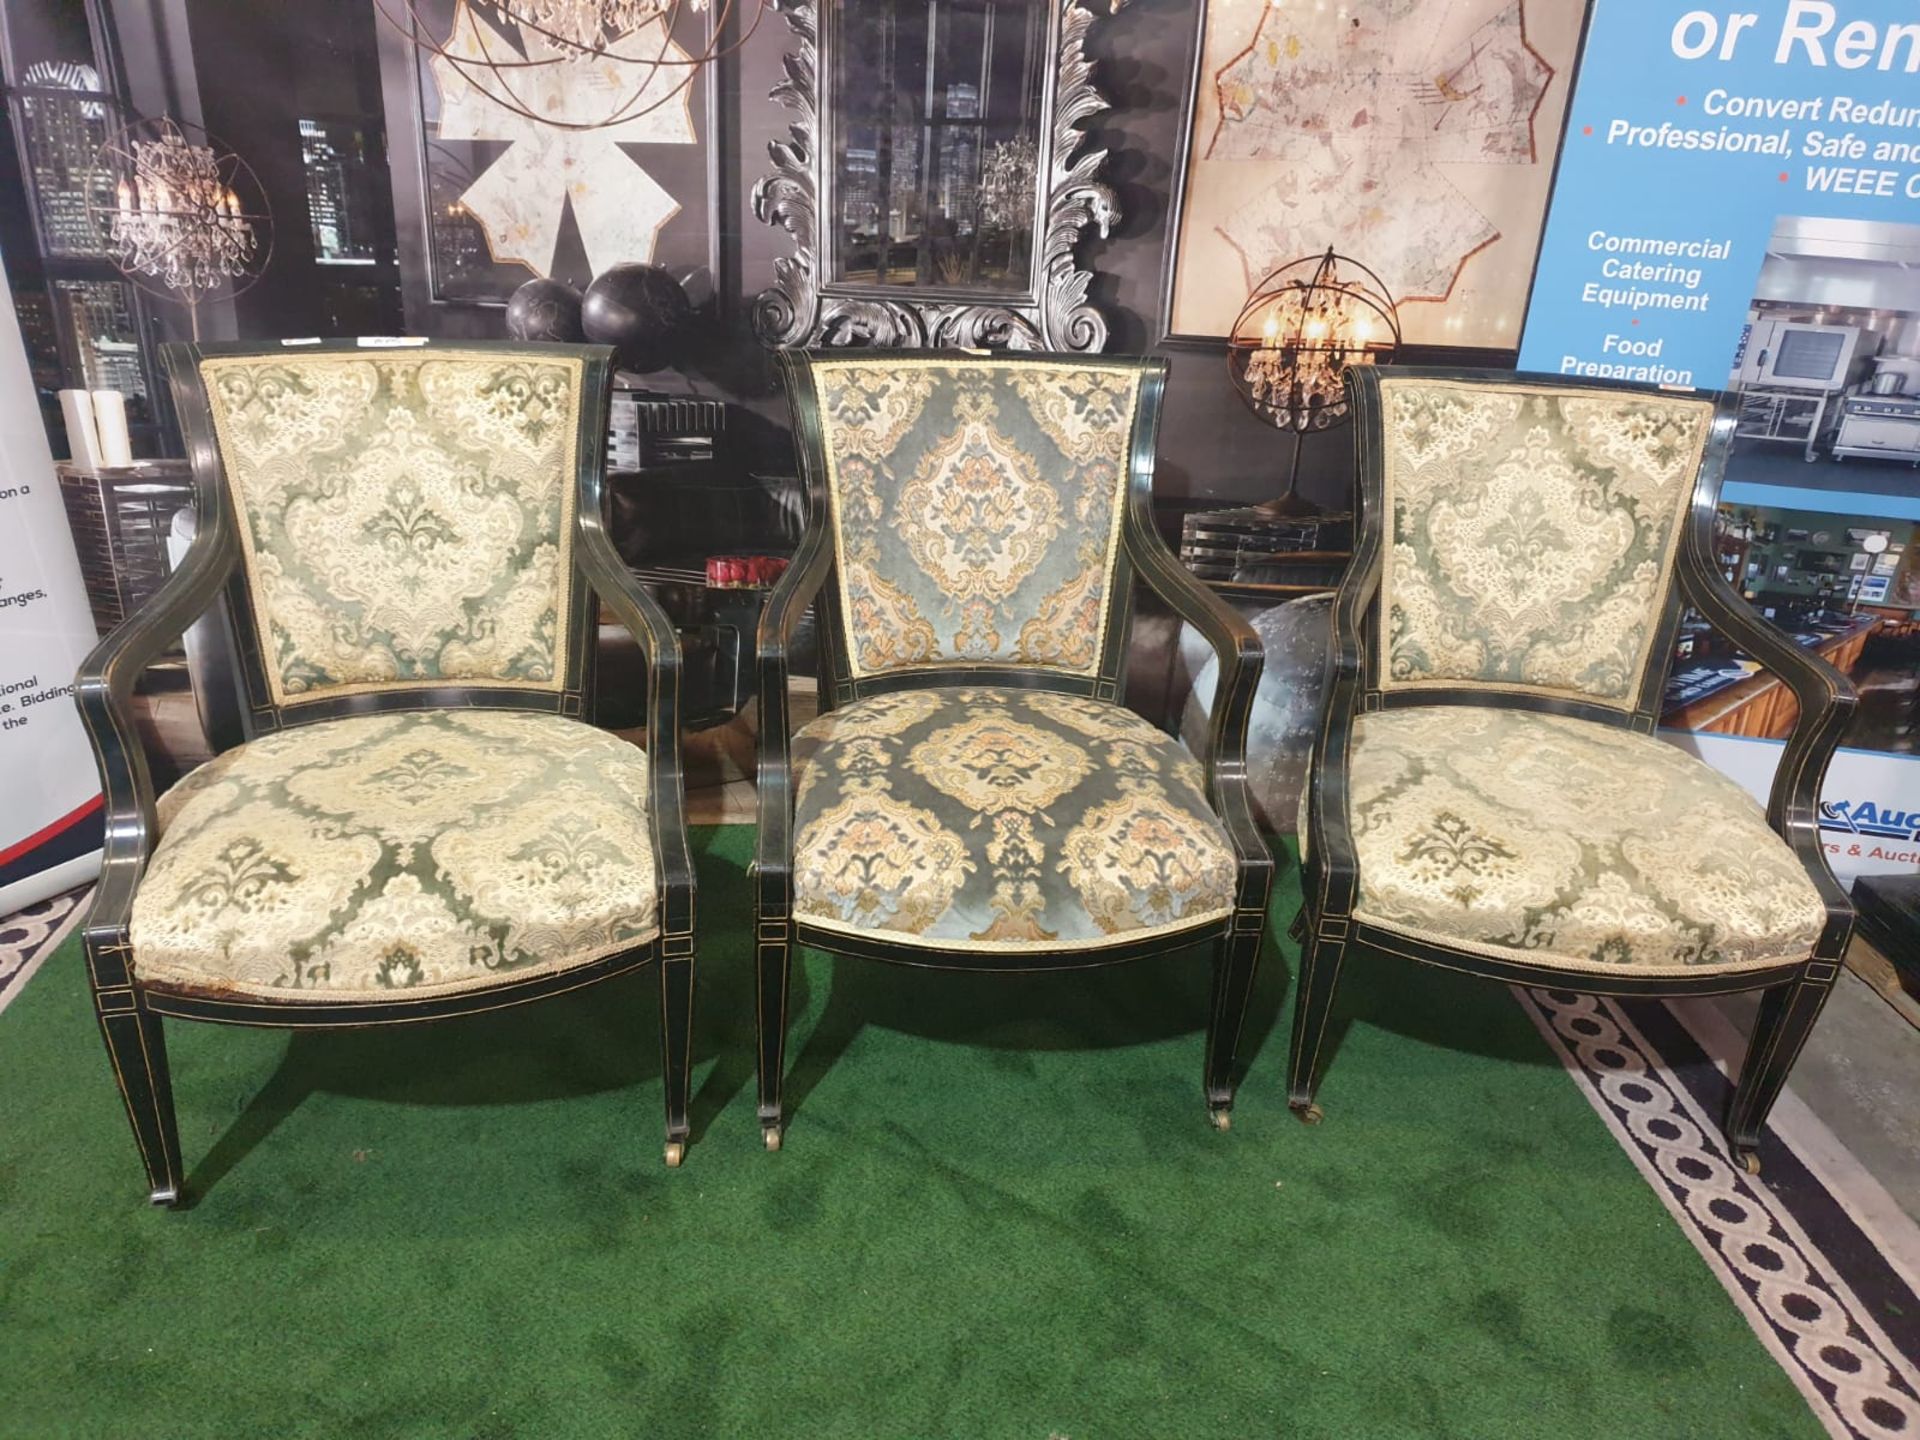 A set of 3 x George III/Neoclassical Style Carver Chairs. Most likely produced during the